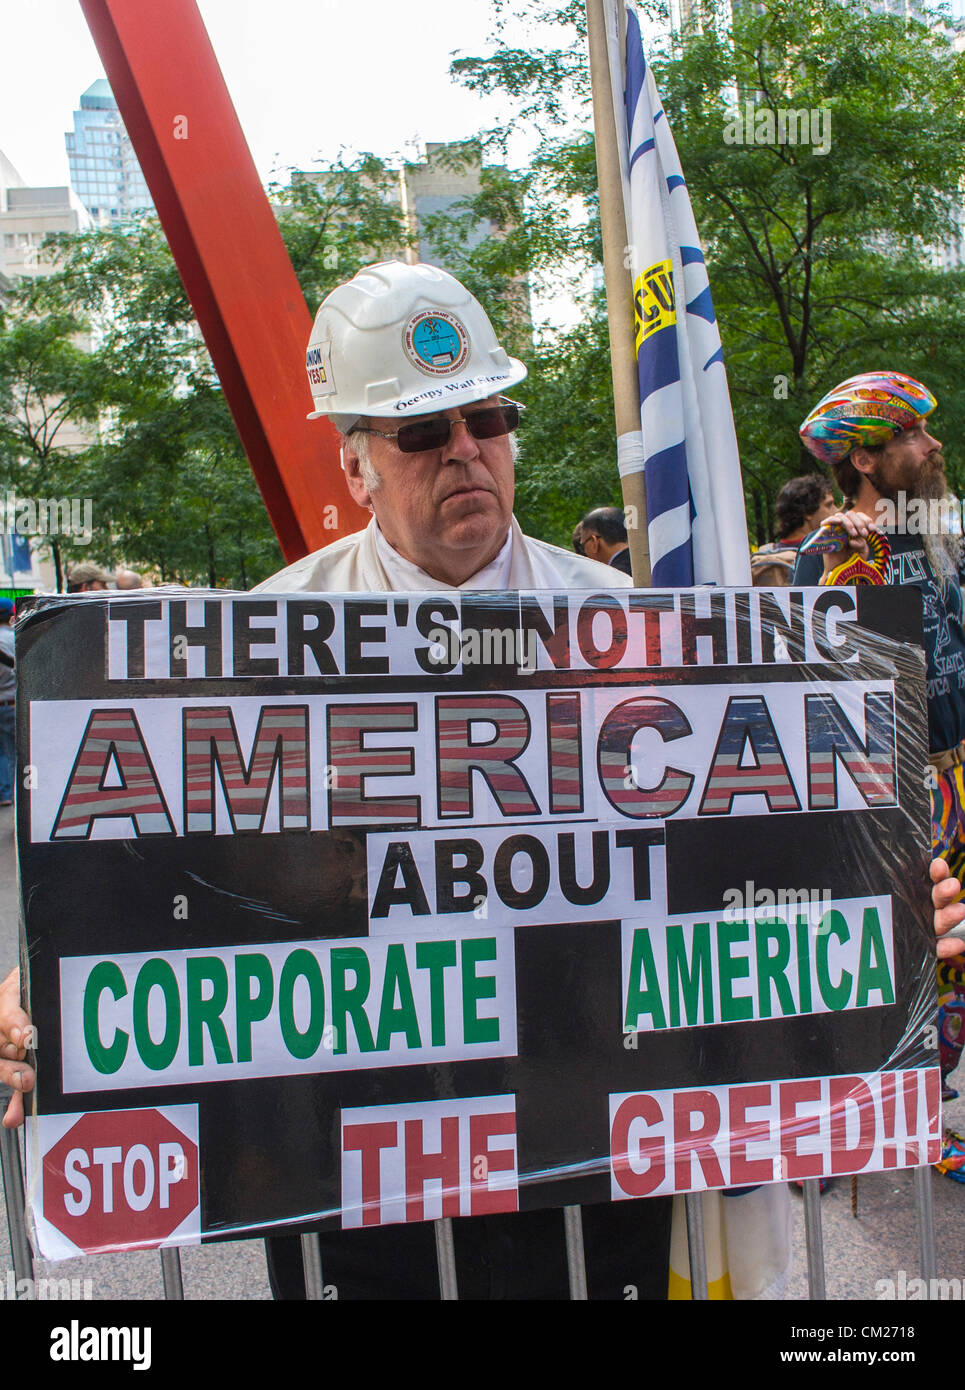 New York City, NY, USA, Protester Holding Protest Sign, Corporate Greed, 'Occupy Wall Street', Portrait, Man in Hard Hat Stock Photo